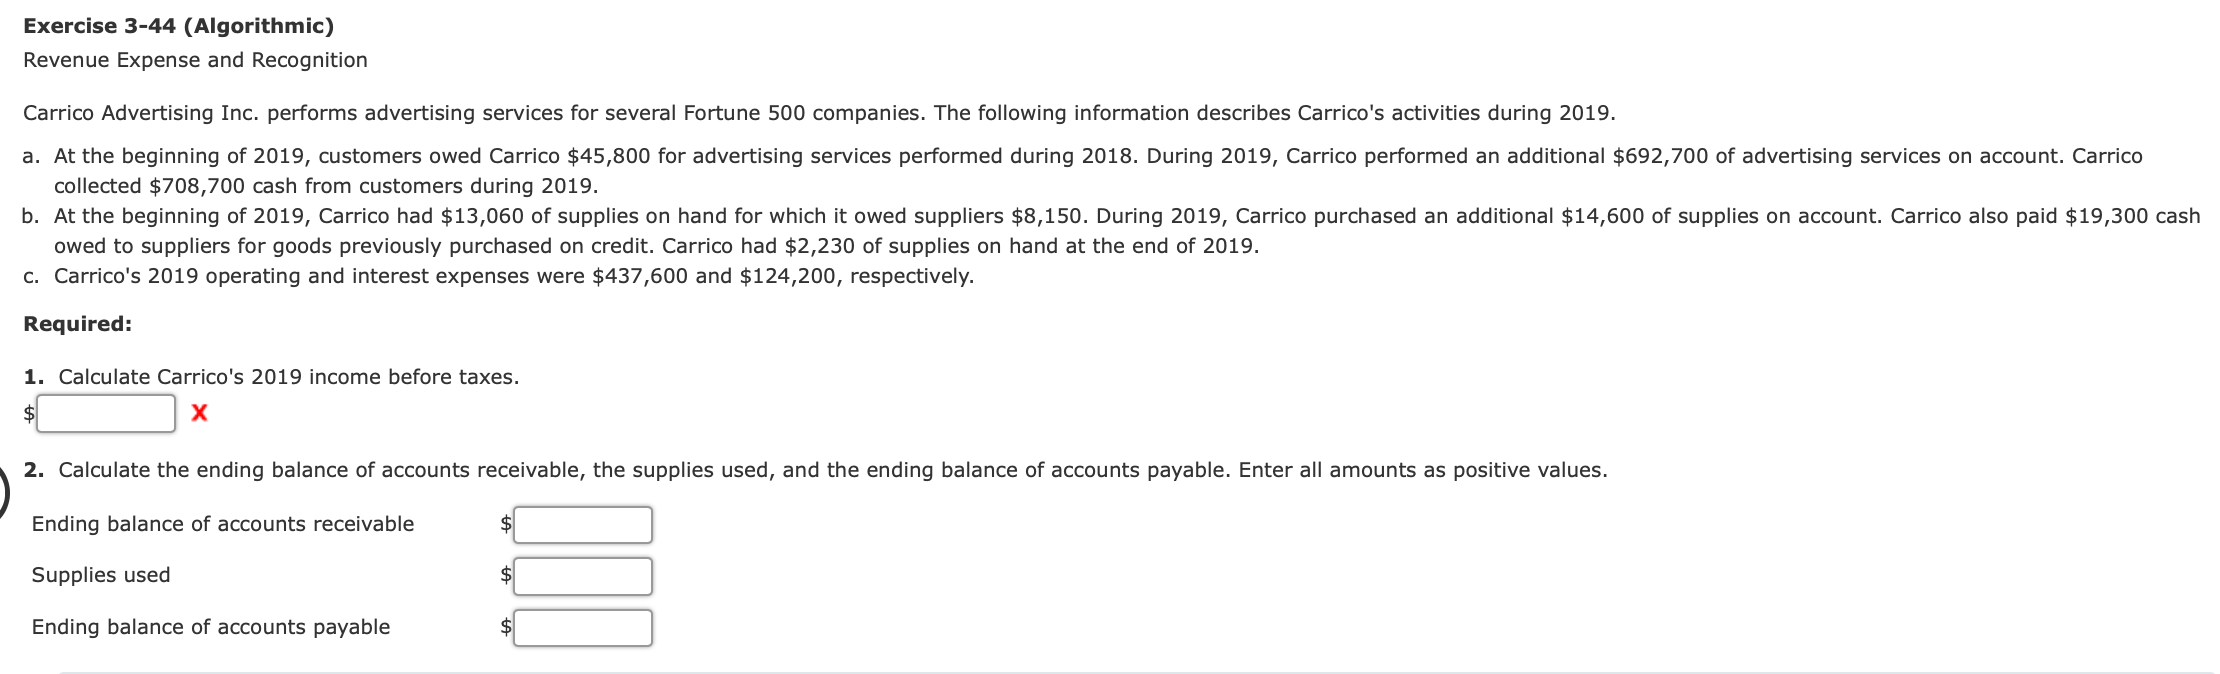 Exercise 3-44 (Algorithmic)
Revenue Expense and Recognition
Carrico Advertising Inc. performs advertising services for several Fortune 500 companies. The following information describes Carrico's activities during 2019.
a. At the beginning of 2019, customers owed Carrico $45,800 for advertising services performed during 2018. During 2019, Carrico performed an additional $692,700 of advertising services on account. Carrico
collected $708,700 cash from customers during 2019.
b. At the beginning of 2019, Carrico had $13,060 of supplies on hand for which it owed suppliers $8,150. During 2019, Carrico purchased an additional $14,600 of supplies on account. Carrico also paid $19,300 cash
owed to suppliers for goods previously purchased on credit. Carrico had $2,230 of supplies on hand at the end of 2019.
c. Carrico's 2019 operating and interest expenses were $437,600 and $124,200, respectively.
Required:
1. Calculate Carrico's 2019 income before taxes.
2$
х
2. Calculate the ending balance of accounts receivable, the supplies used, and the ending balance of accounts payable. Enter all amounts as positive values.
Ending balance of accounts receivable
Supplies used
Ending balance of accounts payable
